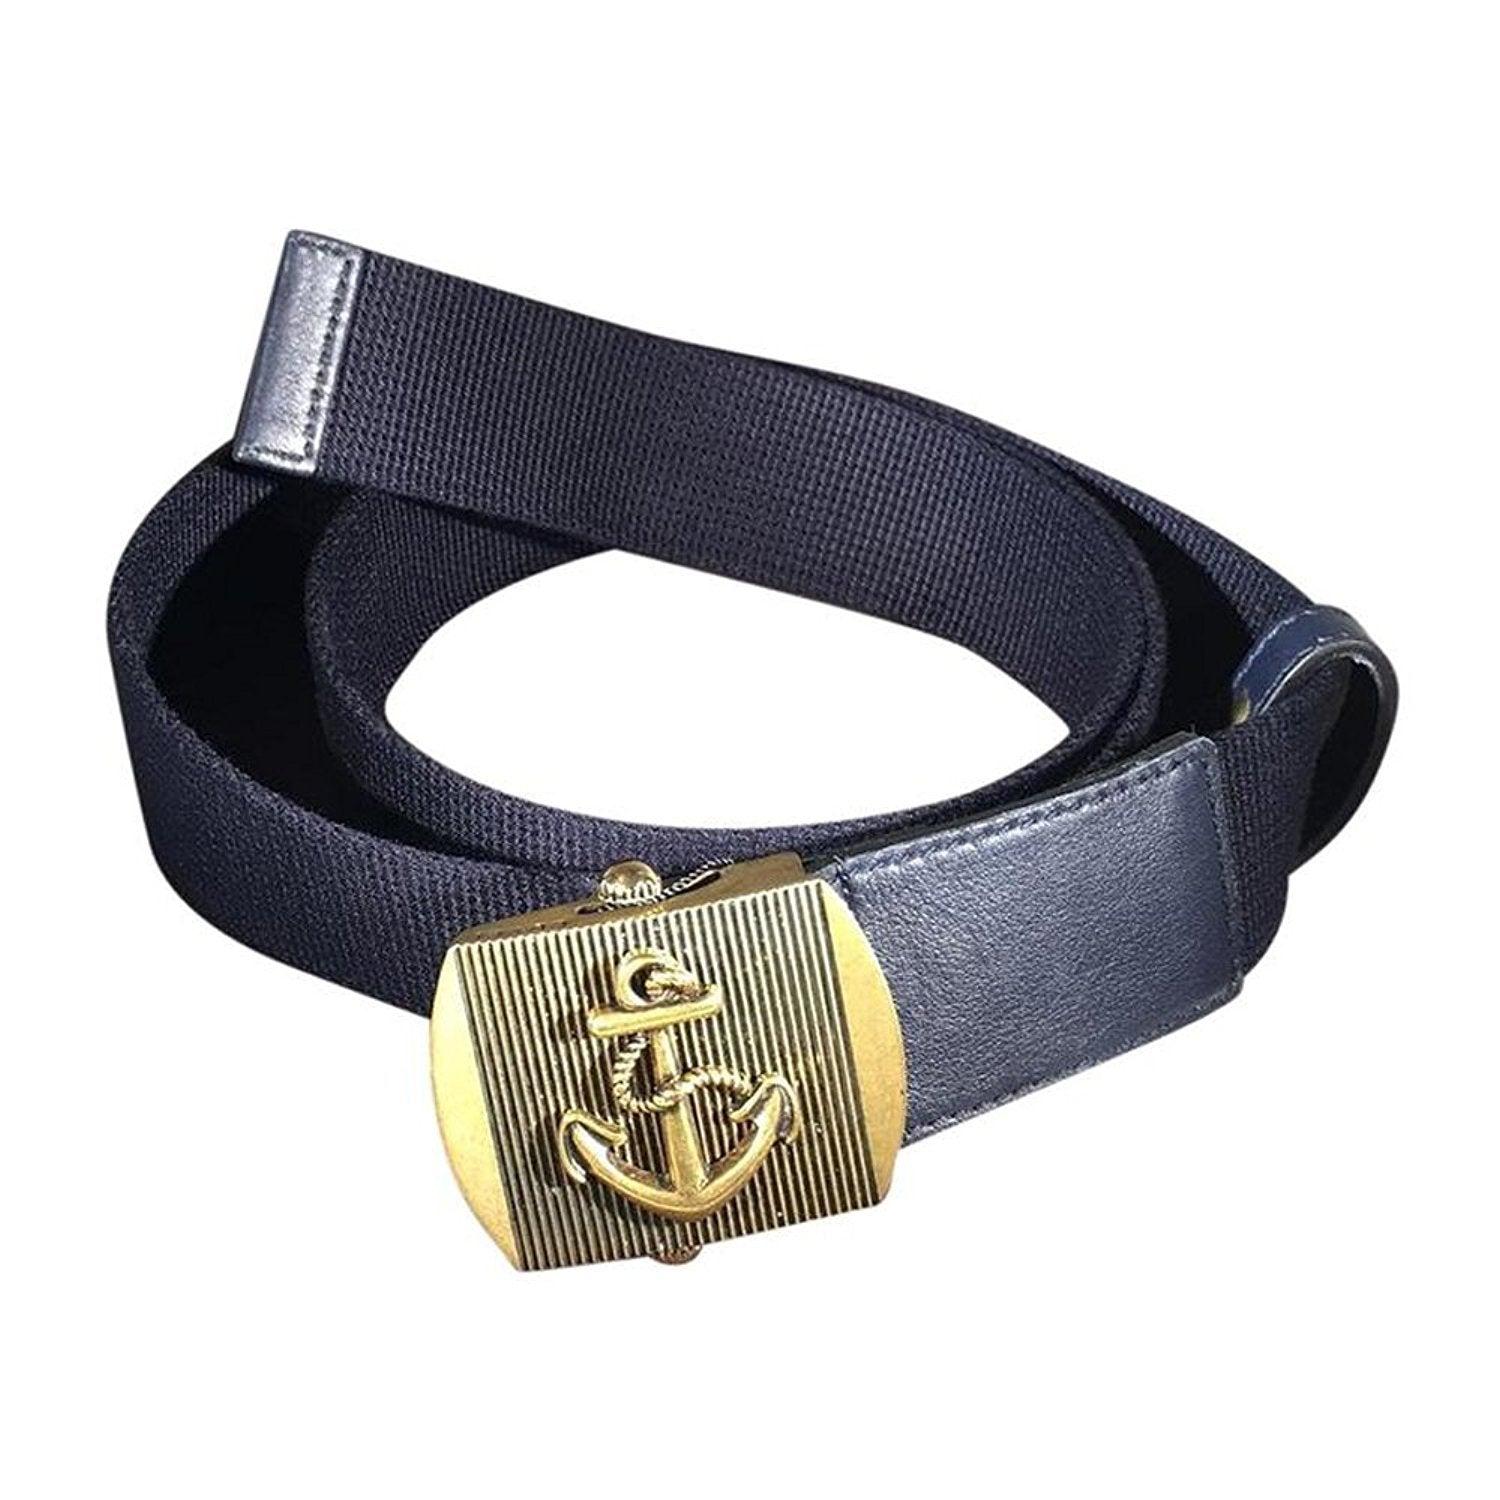 Gucci Fabric Brass Anchor Buckle Belt in Blue for Men - Save 18 